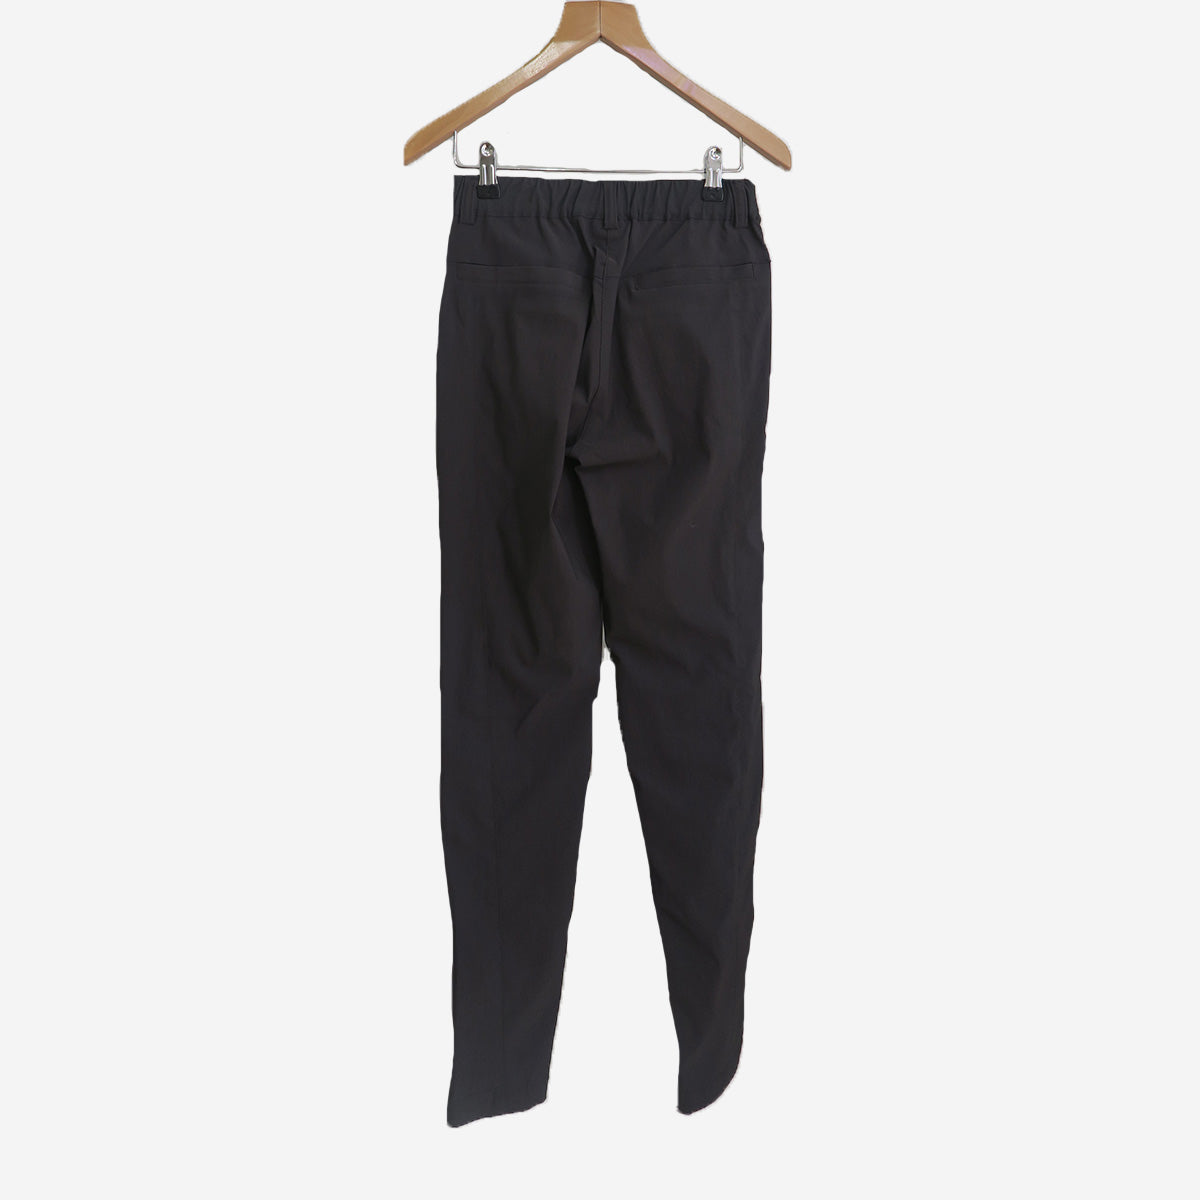 PETRUSKA FITTED TROUSERS